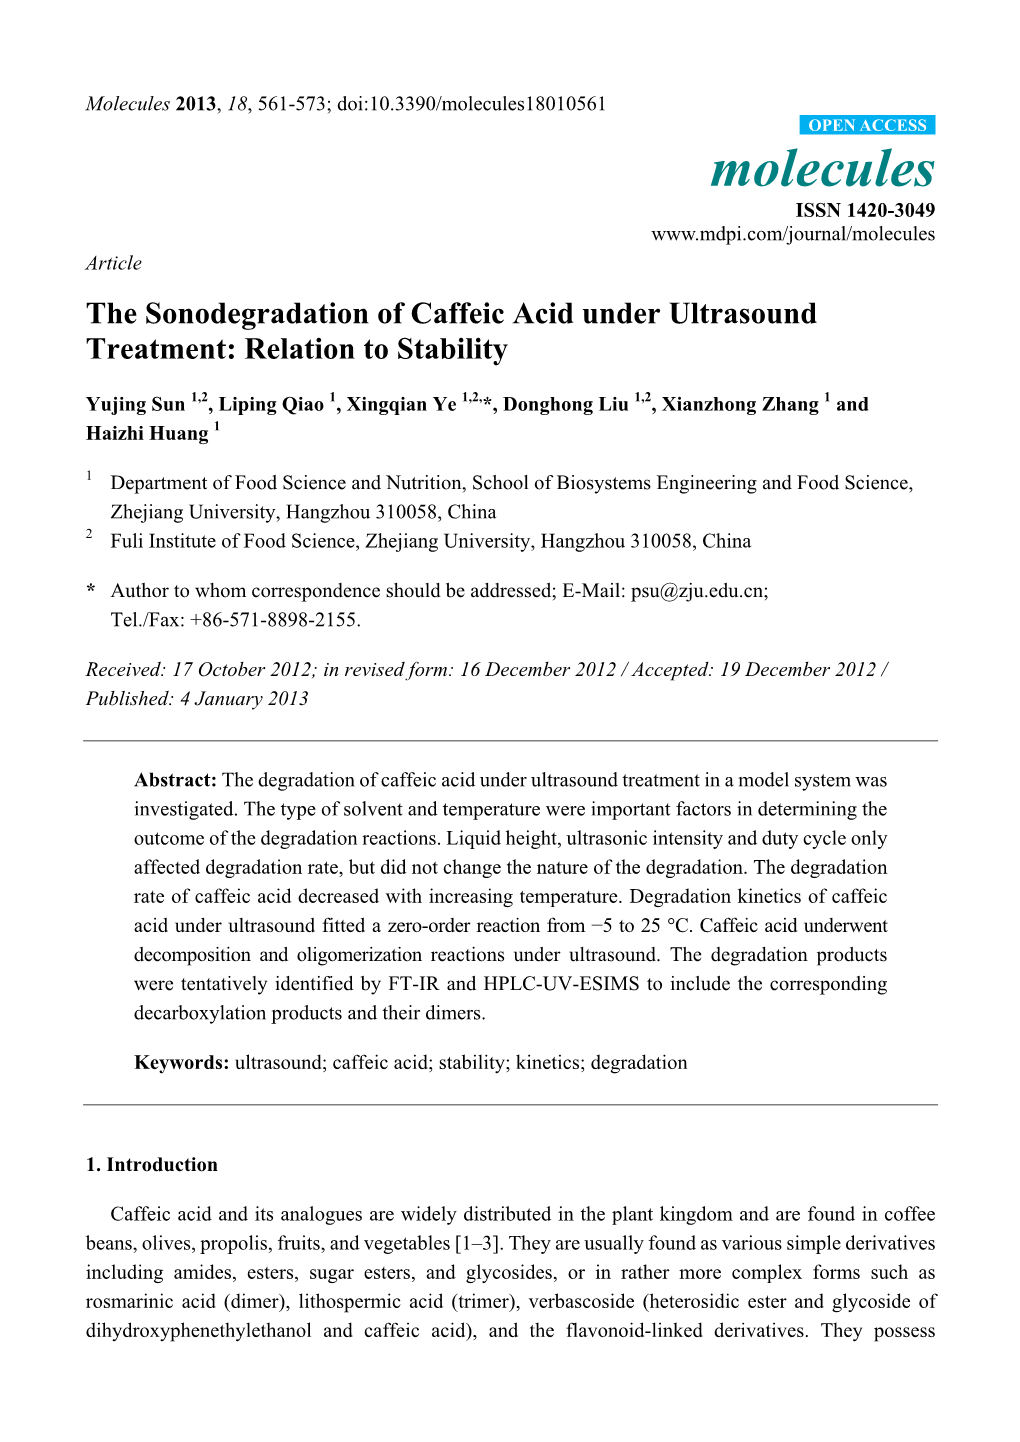 The Sonodegradation of Caffeic Acid Under Ultrasound Treatment: Relation to Stability